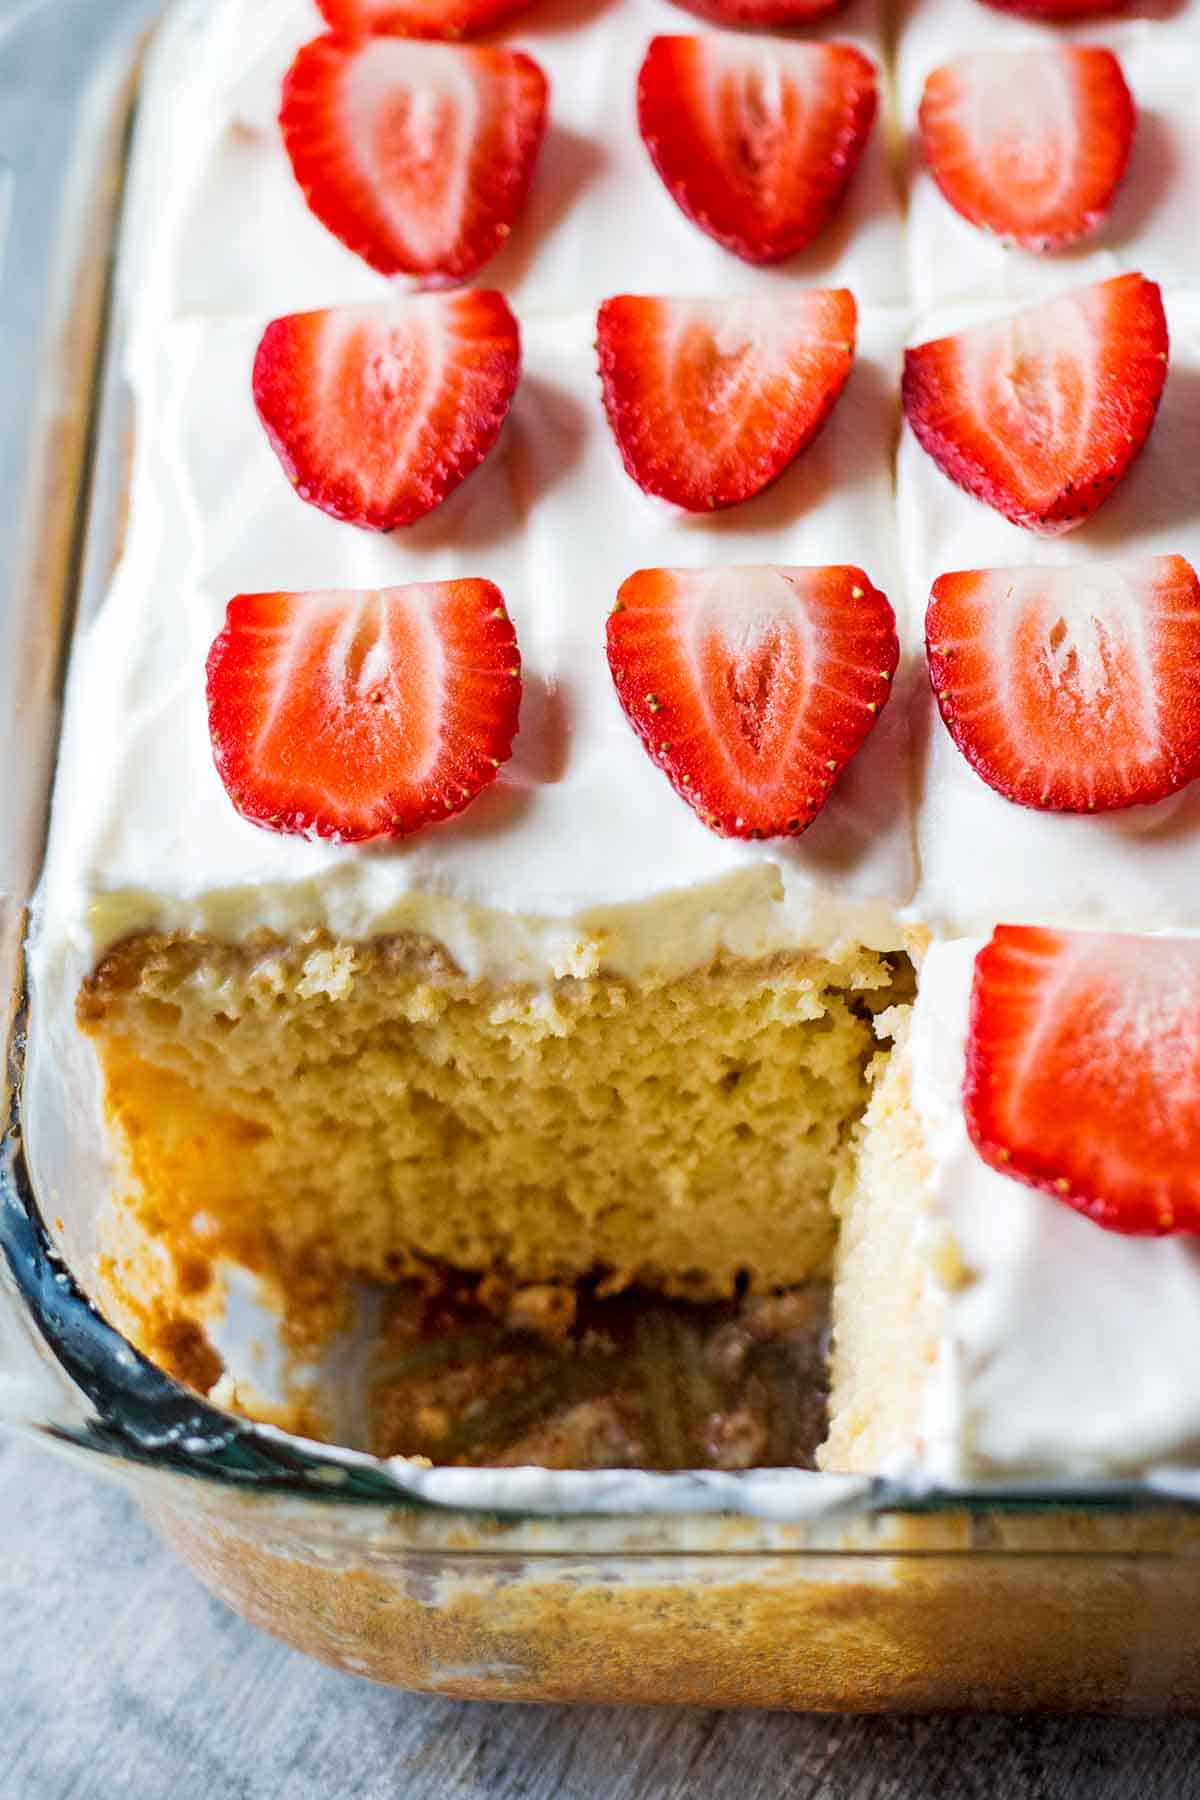 tres leches cake in cake pan with slice removed to reveal fluffy inside cake texture